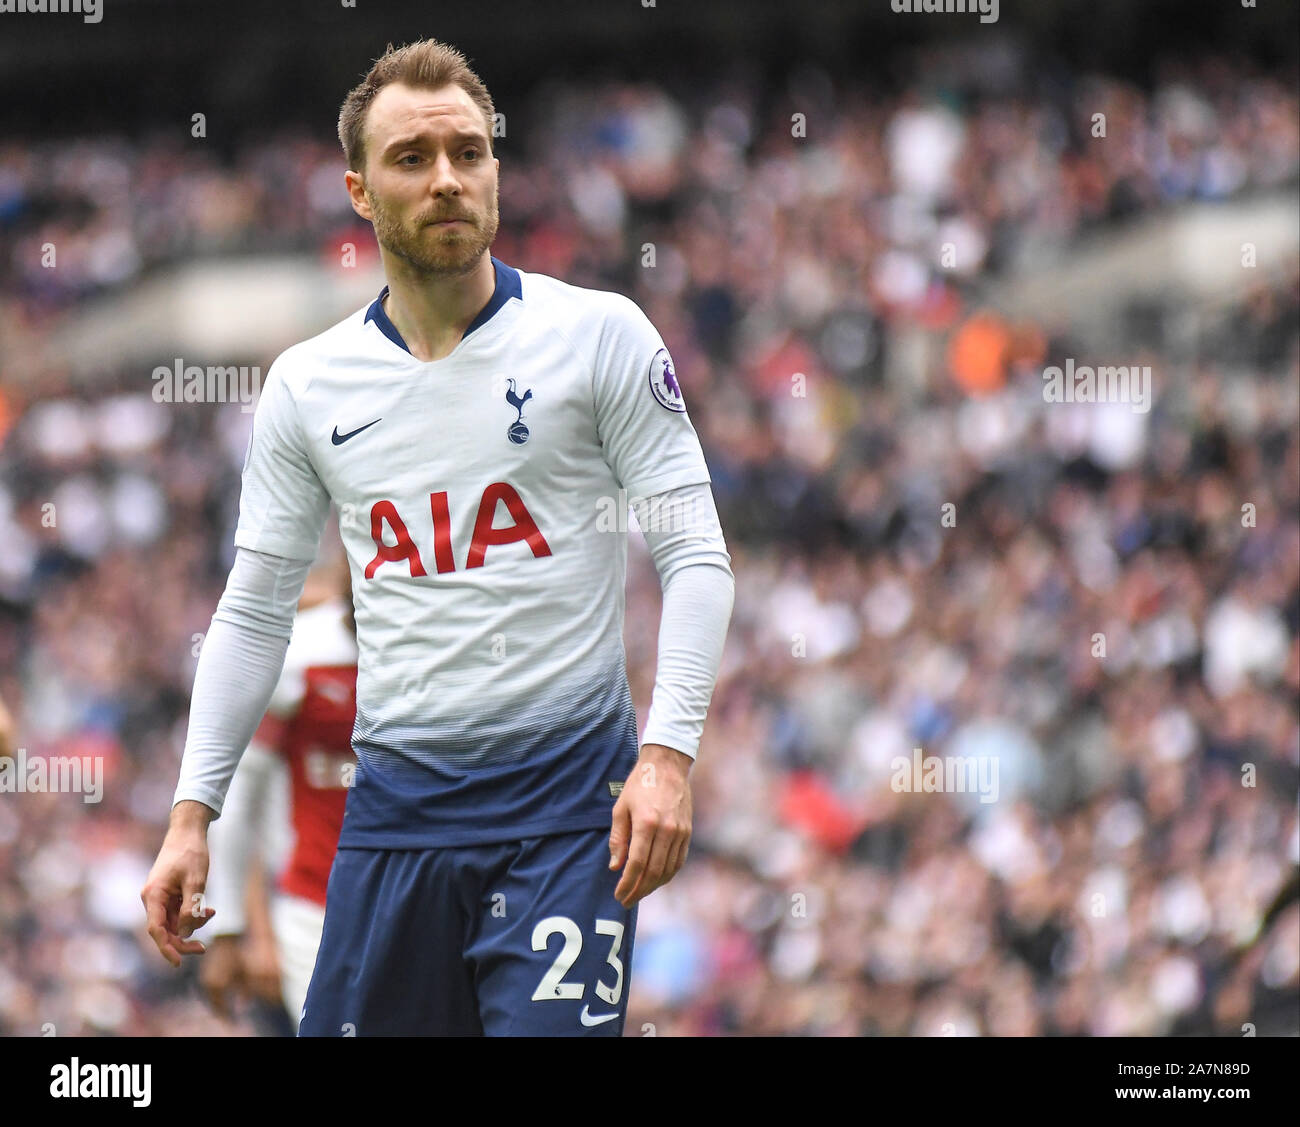 LONDON, ENGLAND - MARCH 2, 2019: Christian Eriksen of Tottenham pictured during the 2018/19 Premier League game between Tottenham Hotspur and Arsenal FC at Wembley Stadium. Stock Photo